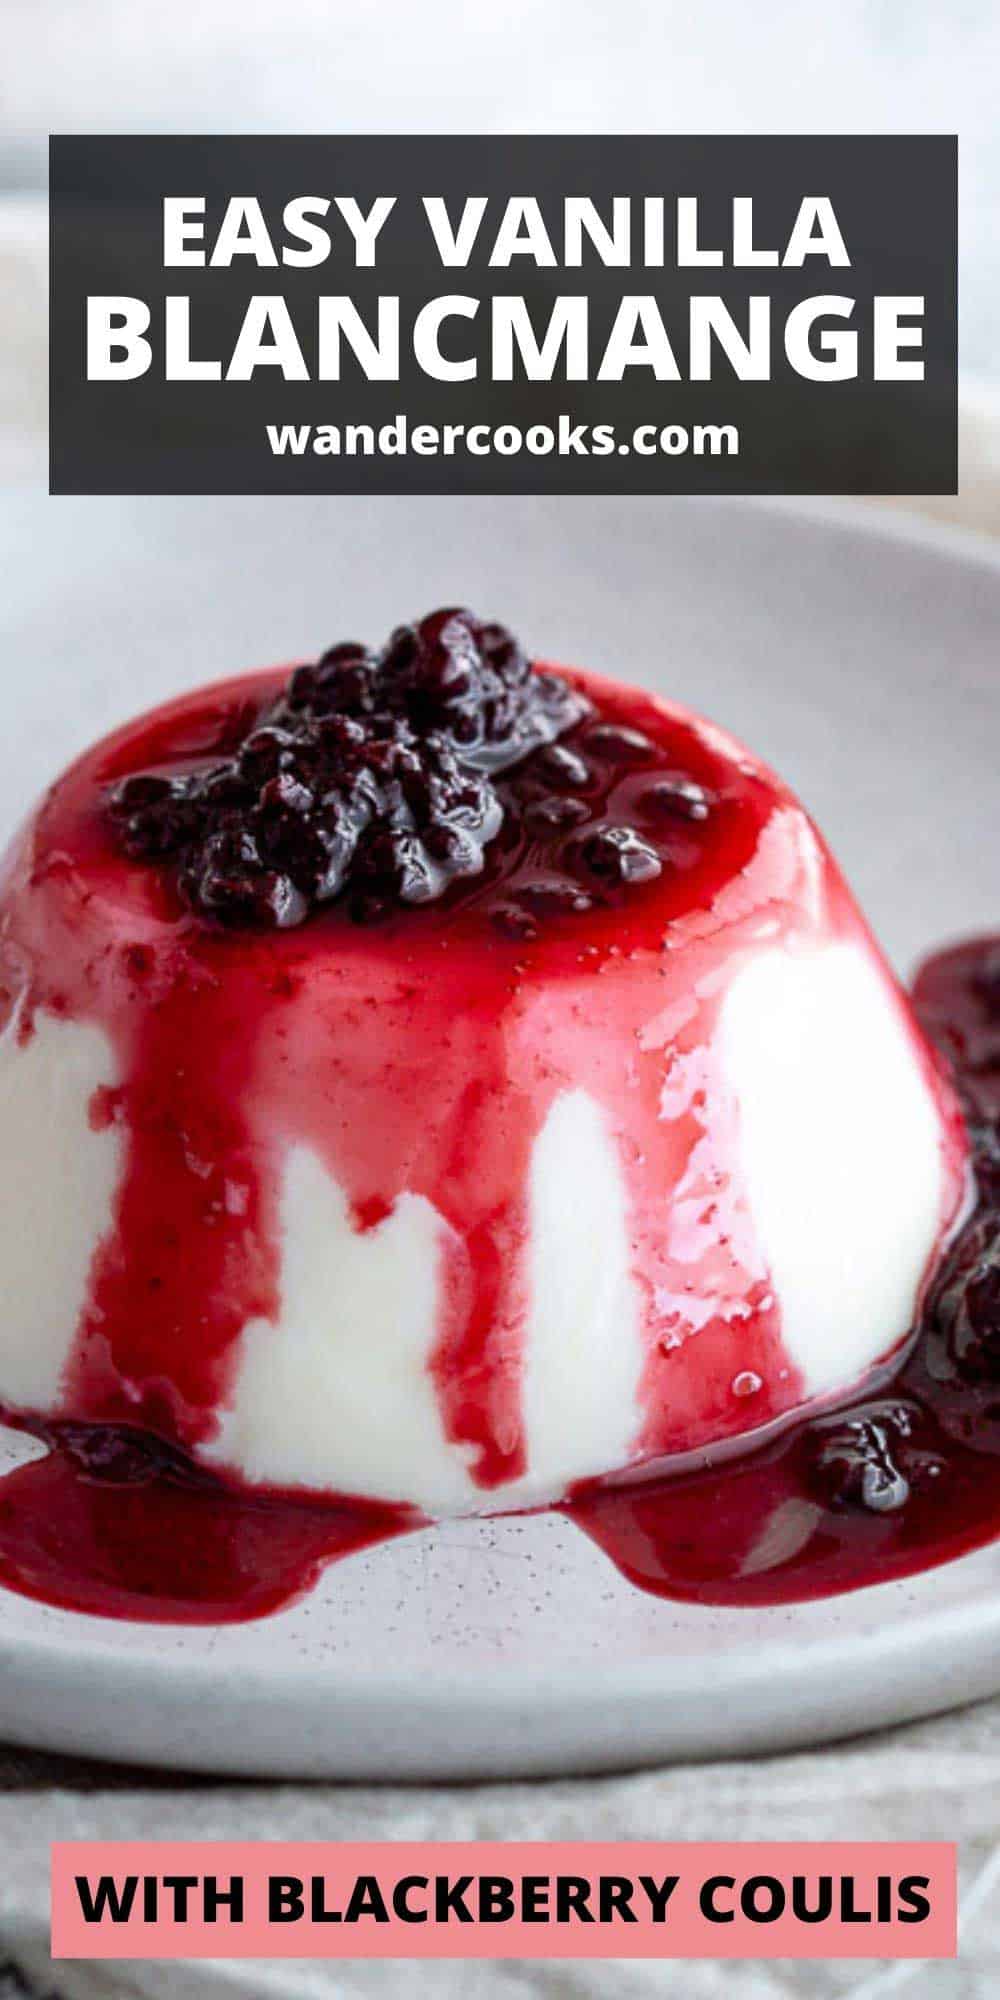 Easy Blancmange Recipe with Blackberry Coulis